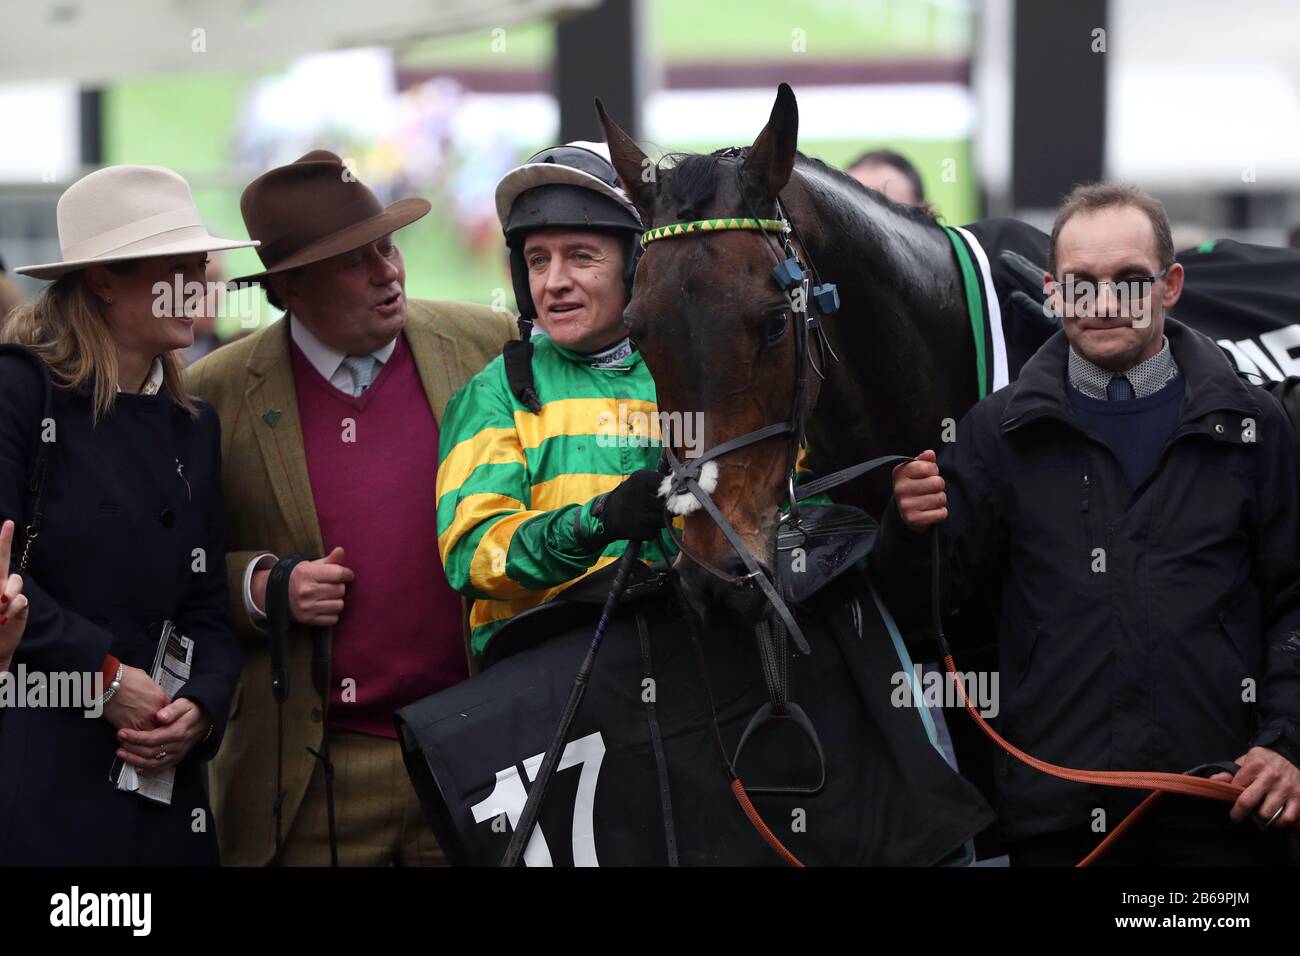 Barry Geraghty alongside Epatante and trainer Nicky Henderson following their victory in the Unibet Champion Hurdle Challenge Trophy on day one of the Cheltenham Festival at Cheltenham Racecourse, Cheltenham. Stock Photo